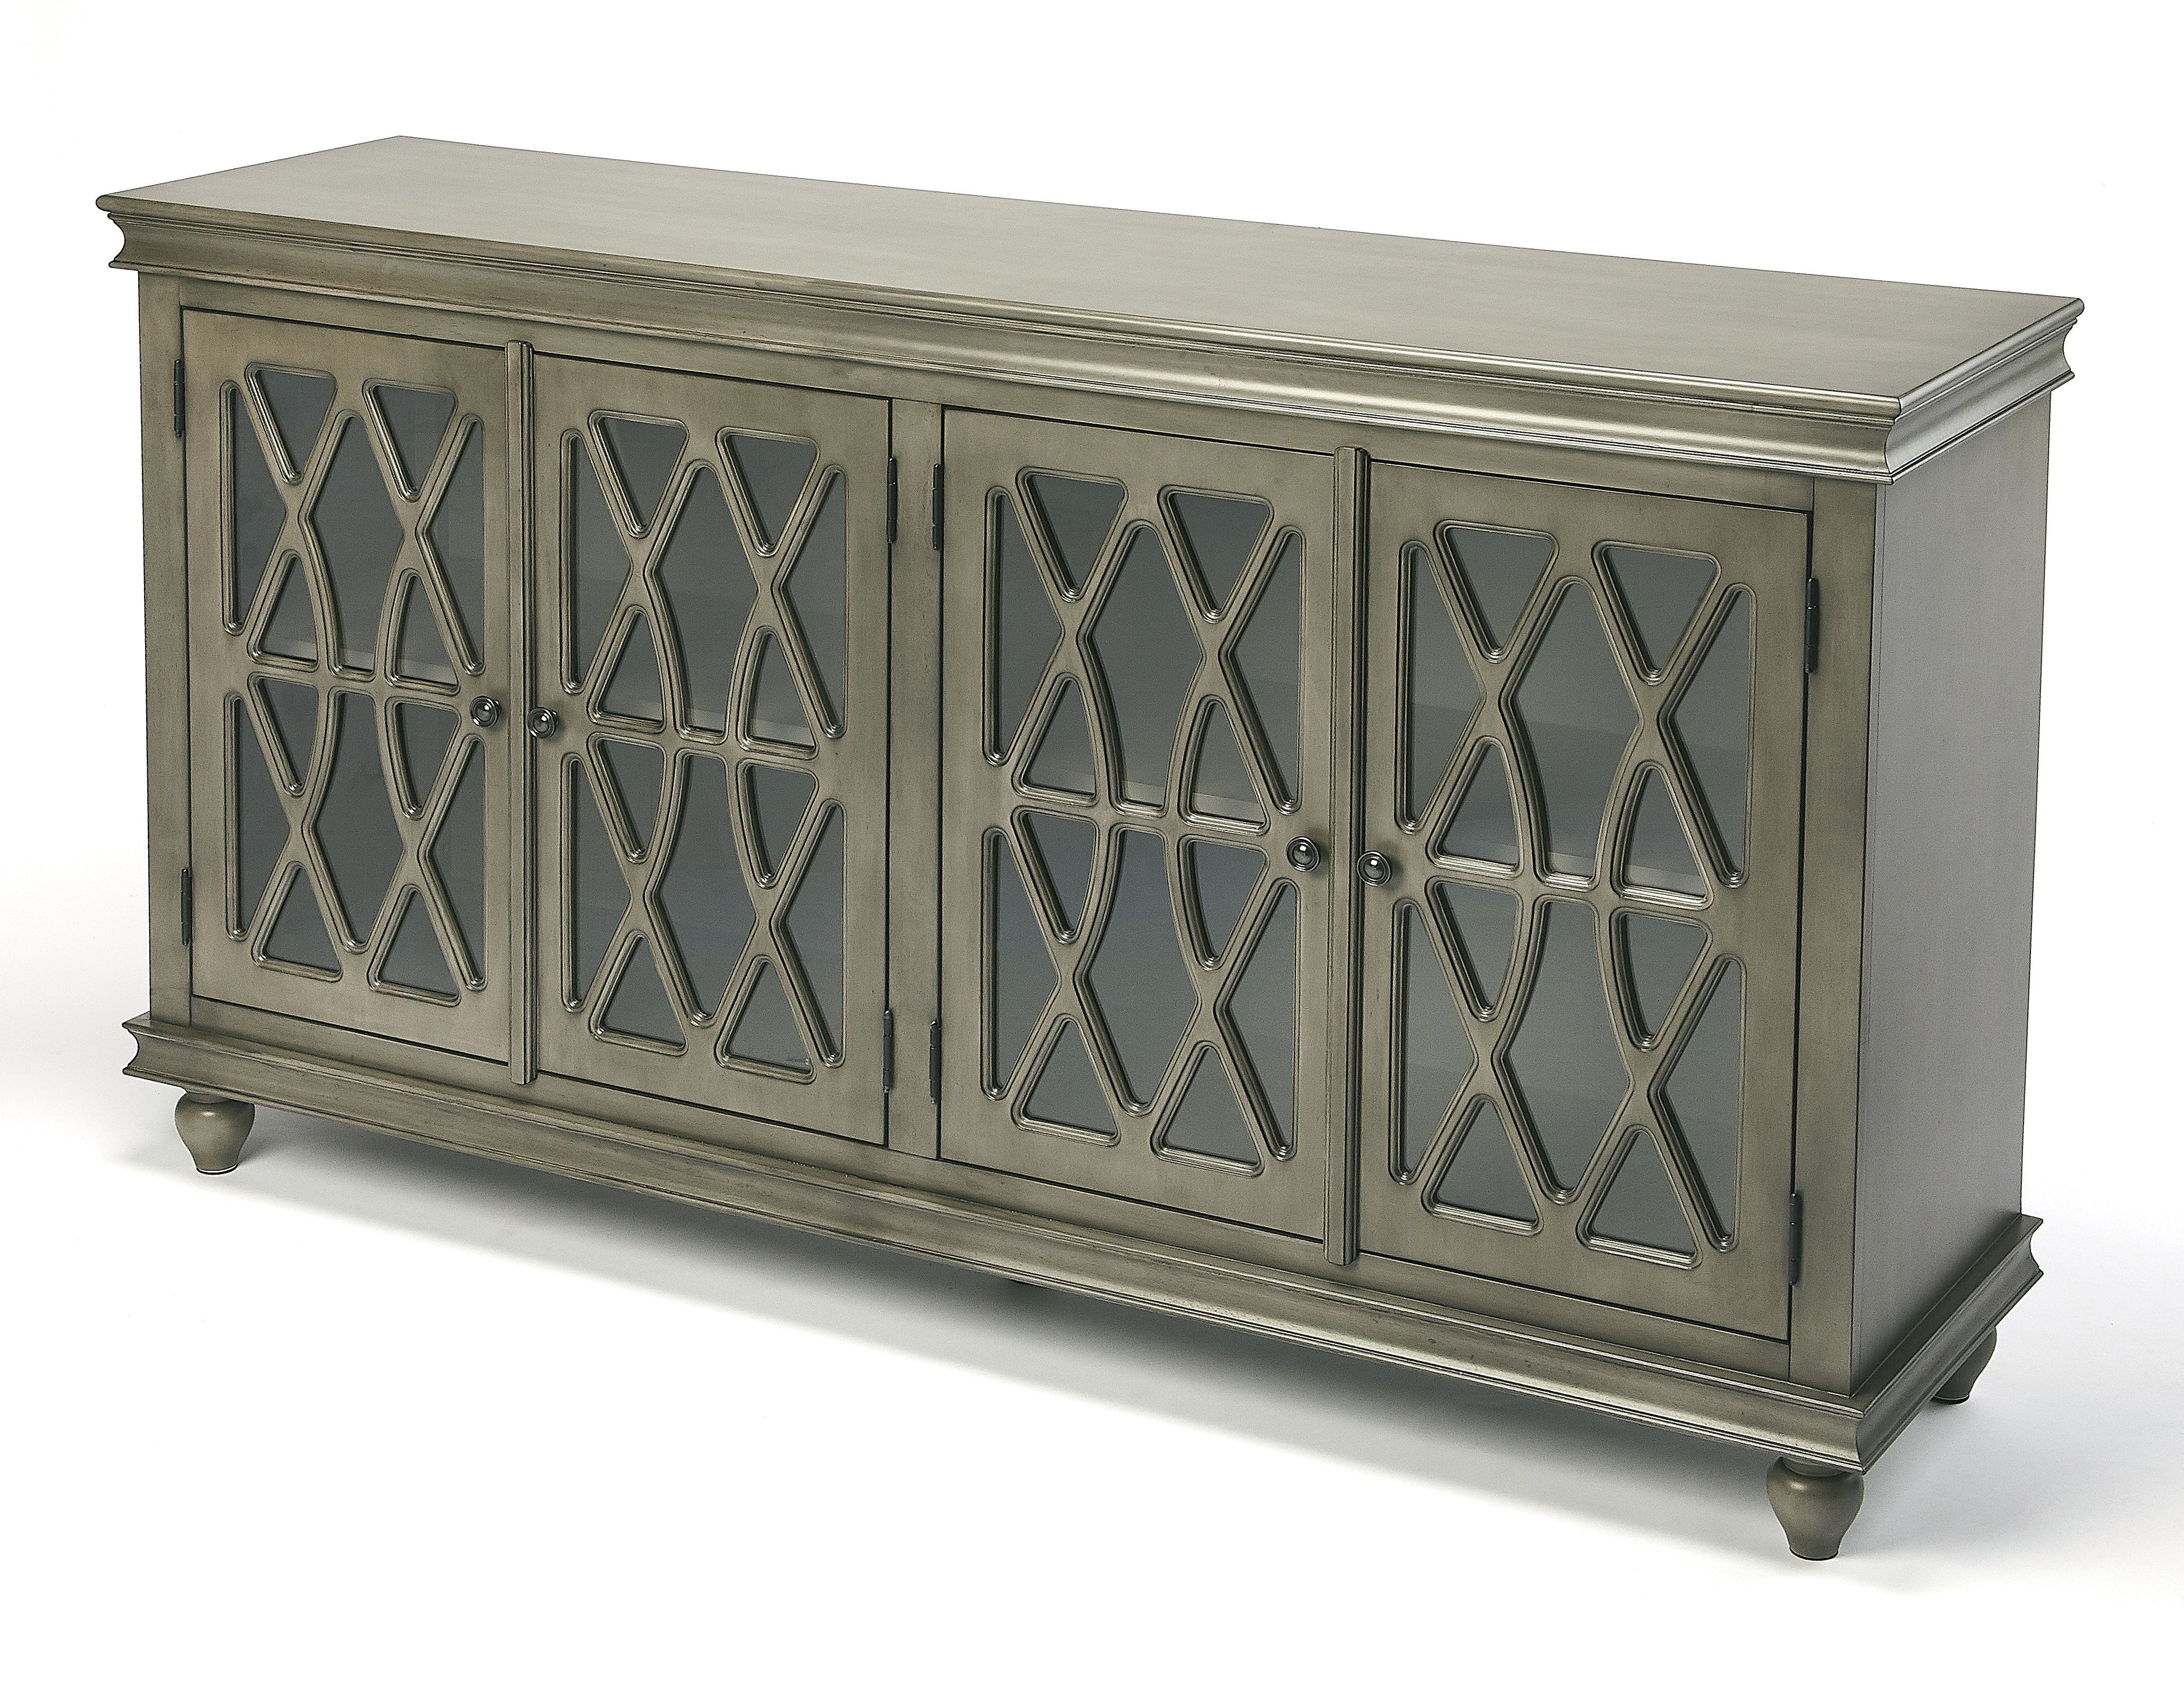 Grey Sideboards & Buffets | Joss & Main With Regard To Current Cazenovia Charnley Sideboards (View 2 of 20)